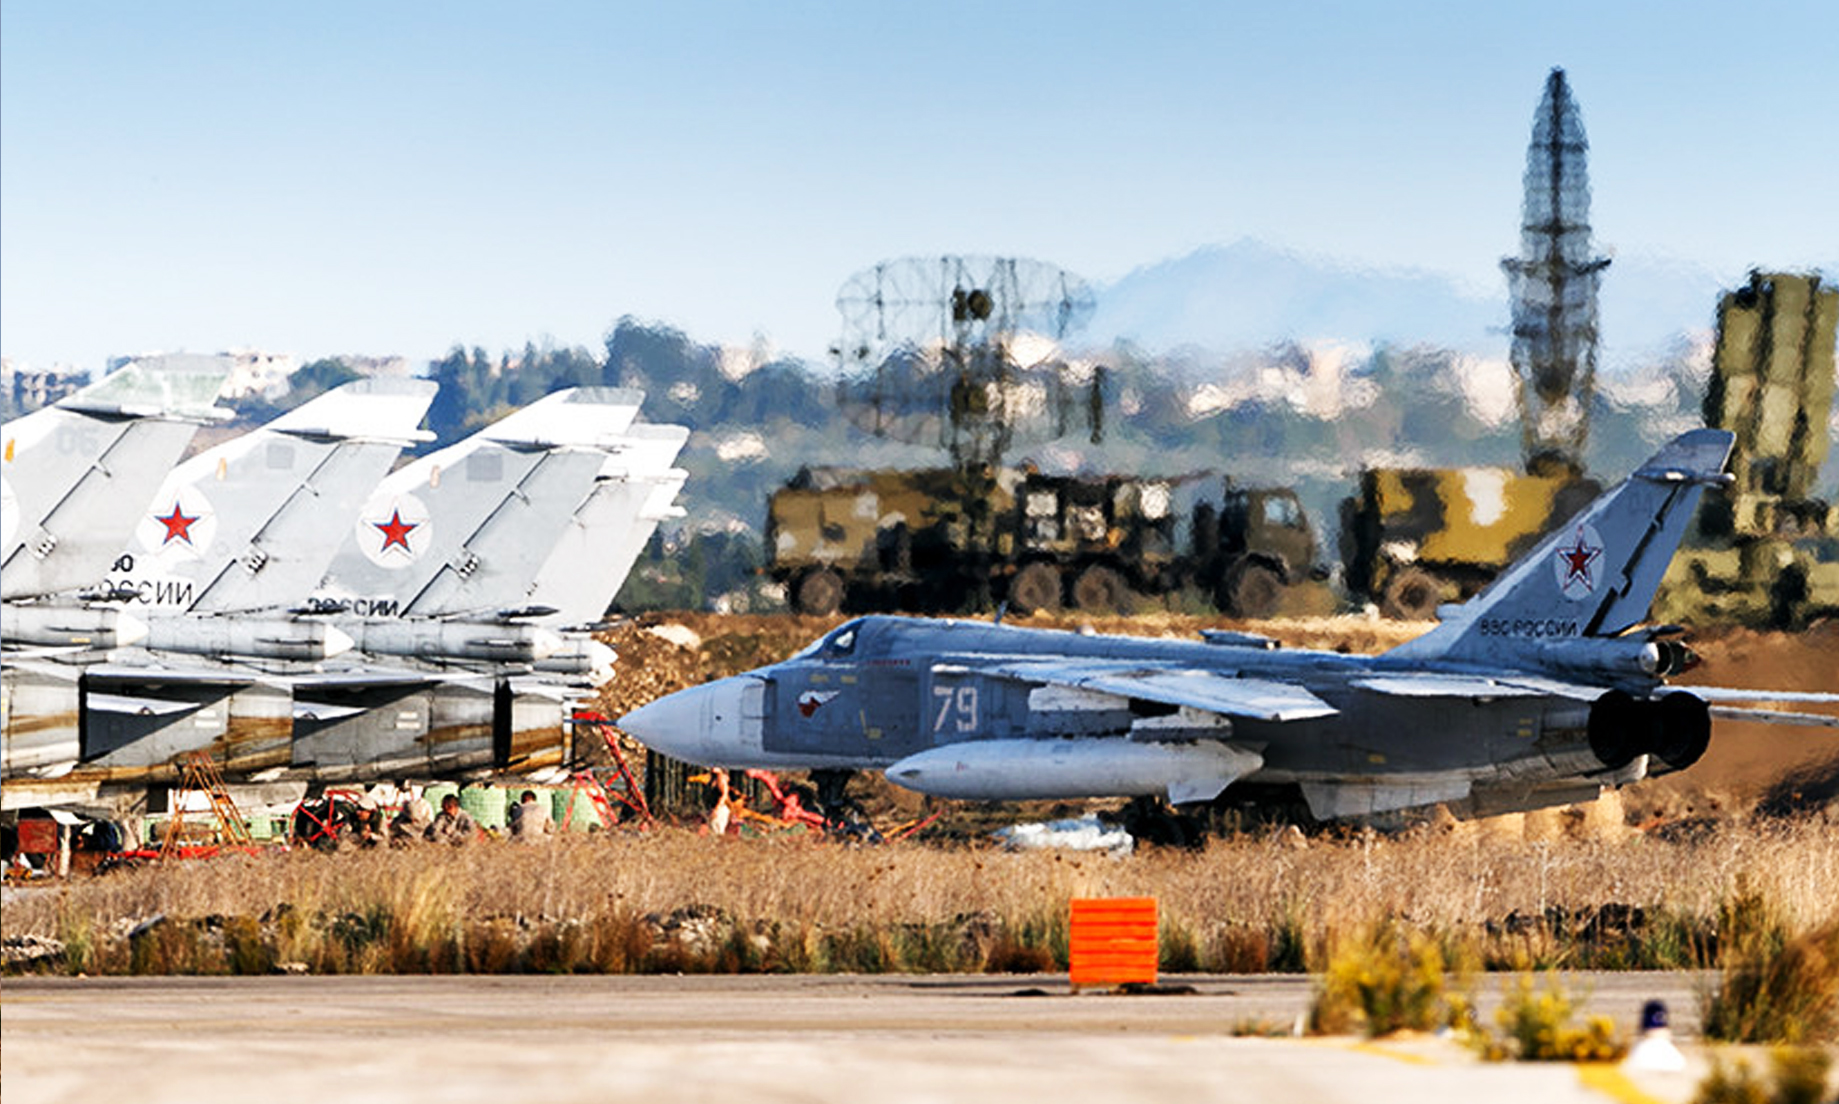 Russian Hmeymin airbase in Syria twice comes under shelling by militants